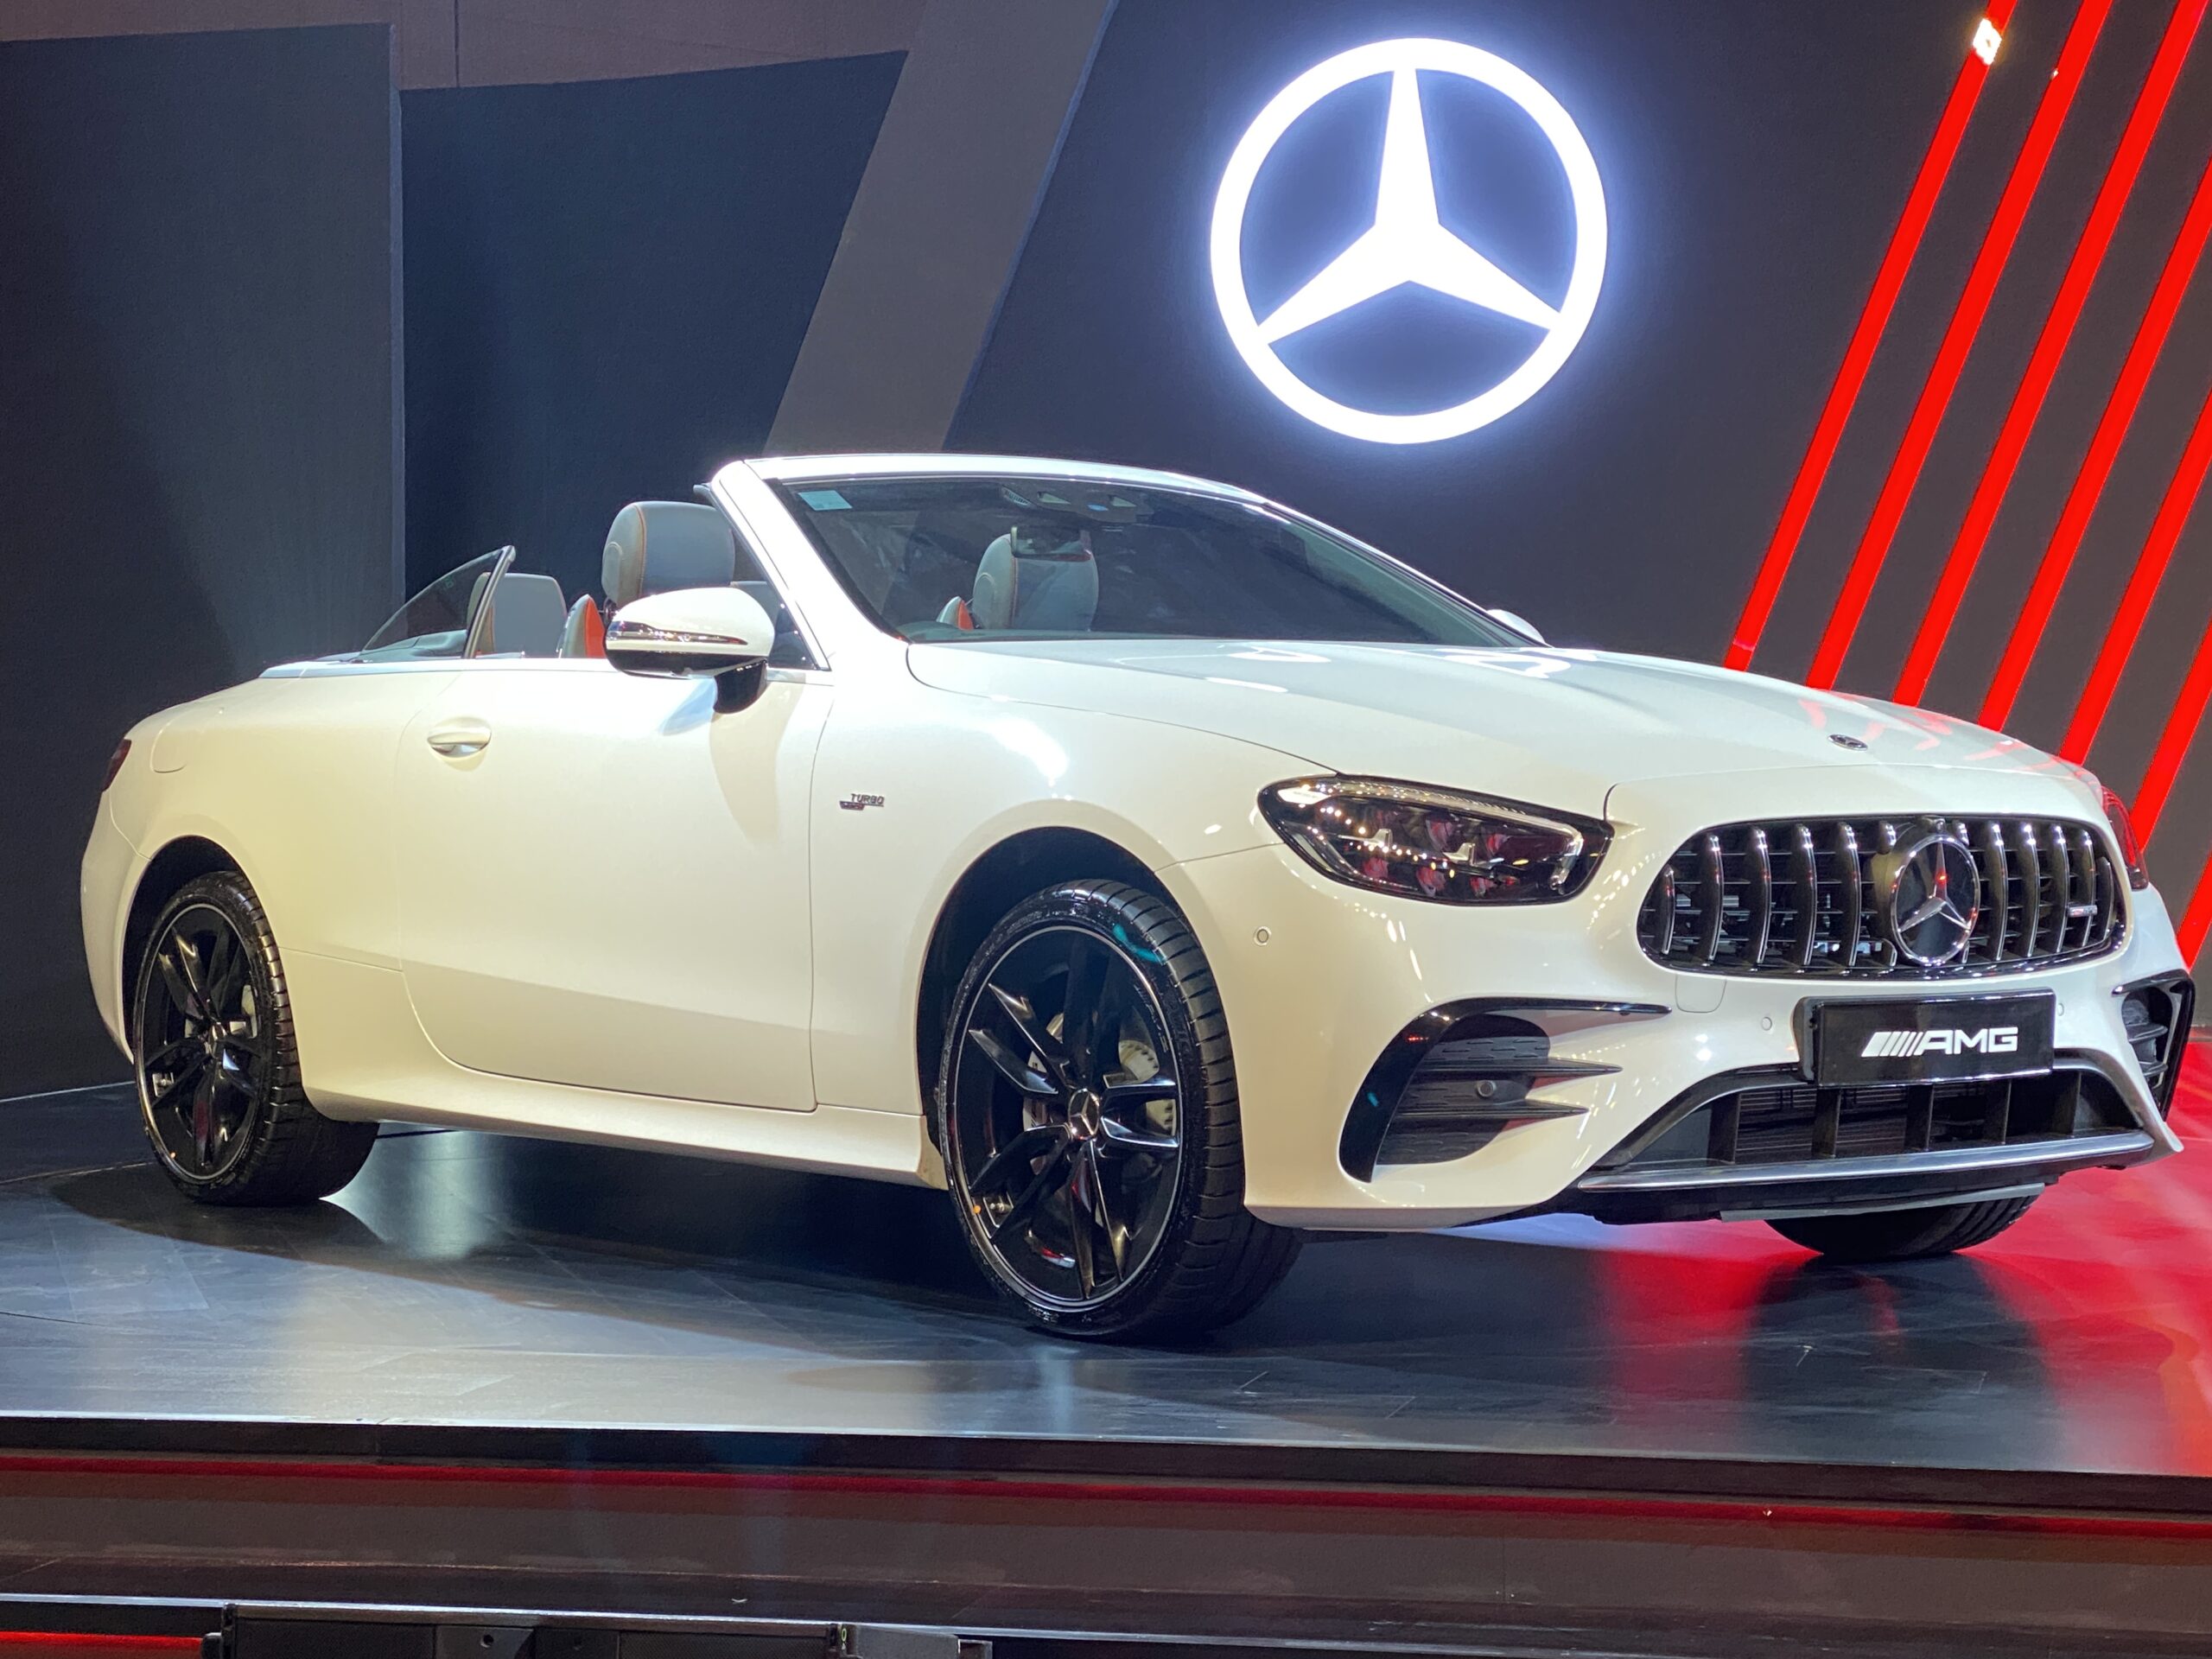 Mercedes Benz Continue To Lead In April Luxury Car Sales Followed By BMW